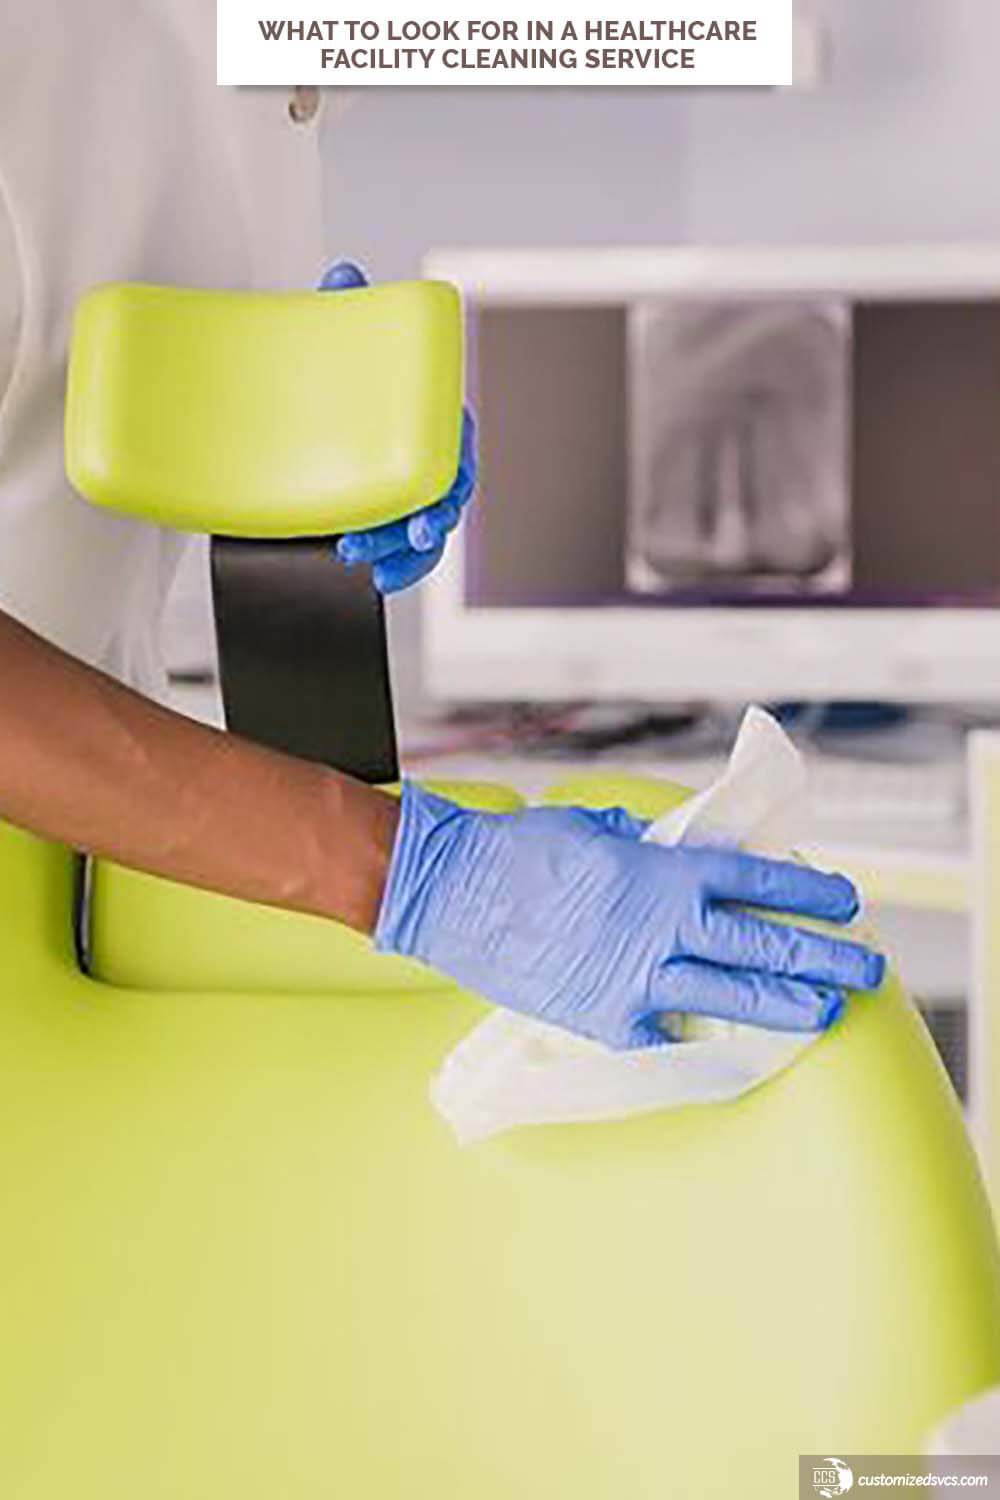 What To Look For In A Healthcare Facility Cleaning Service